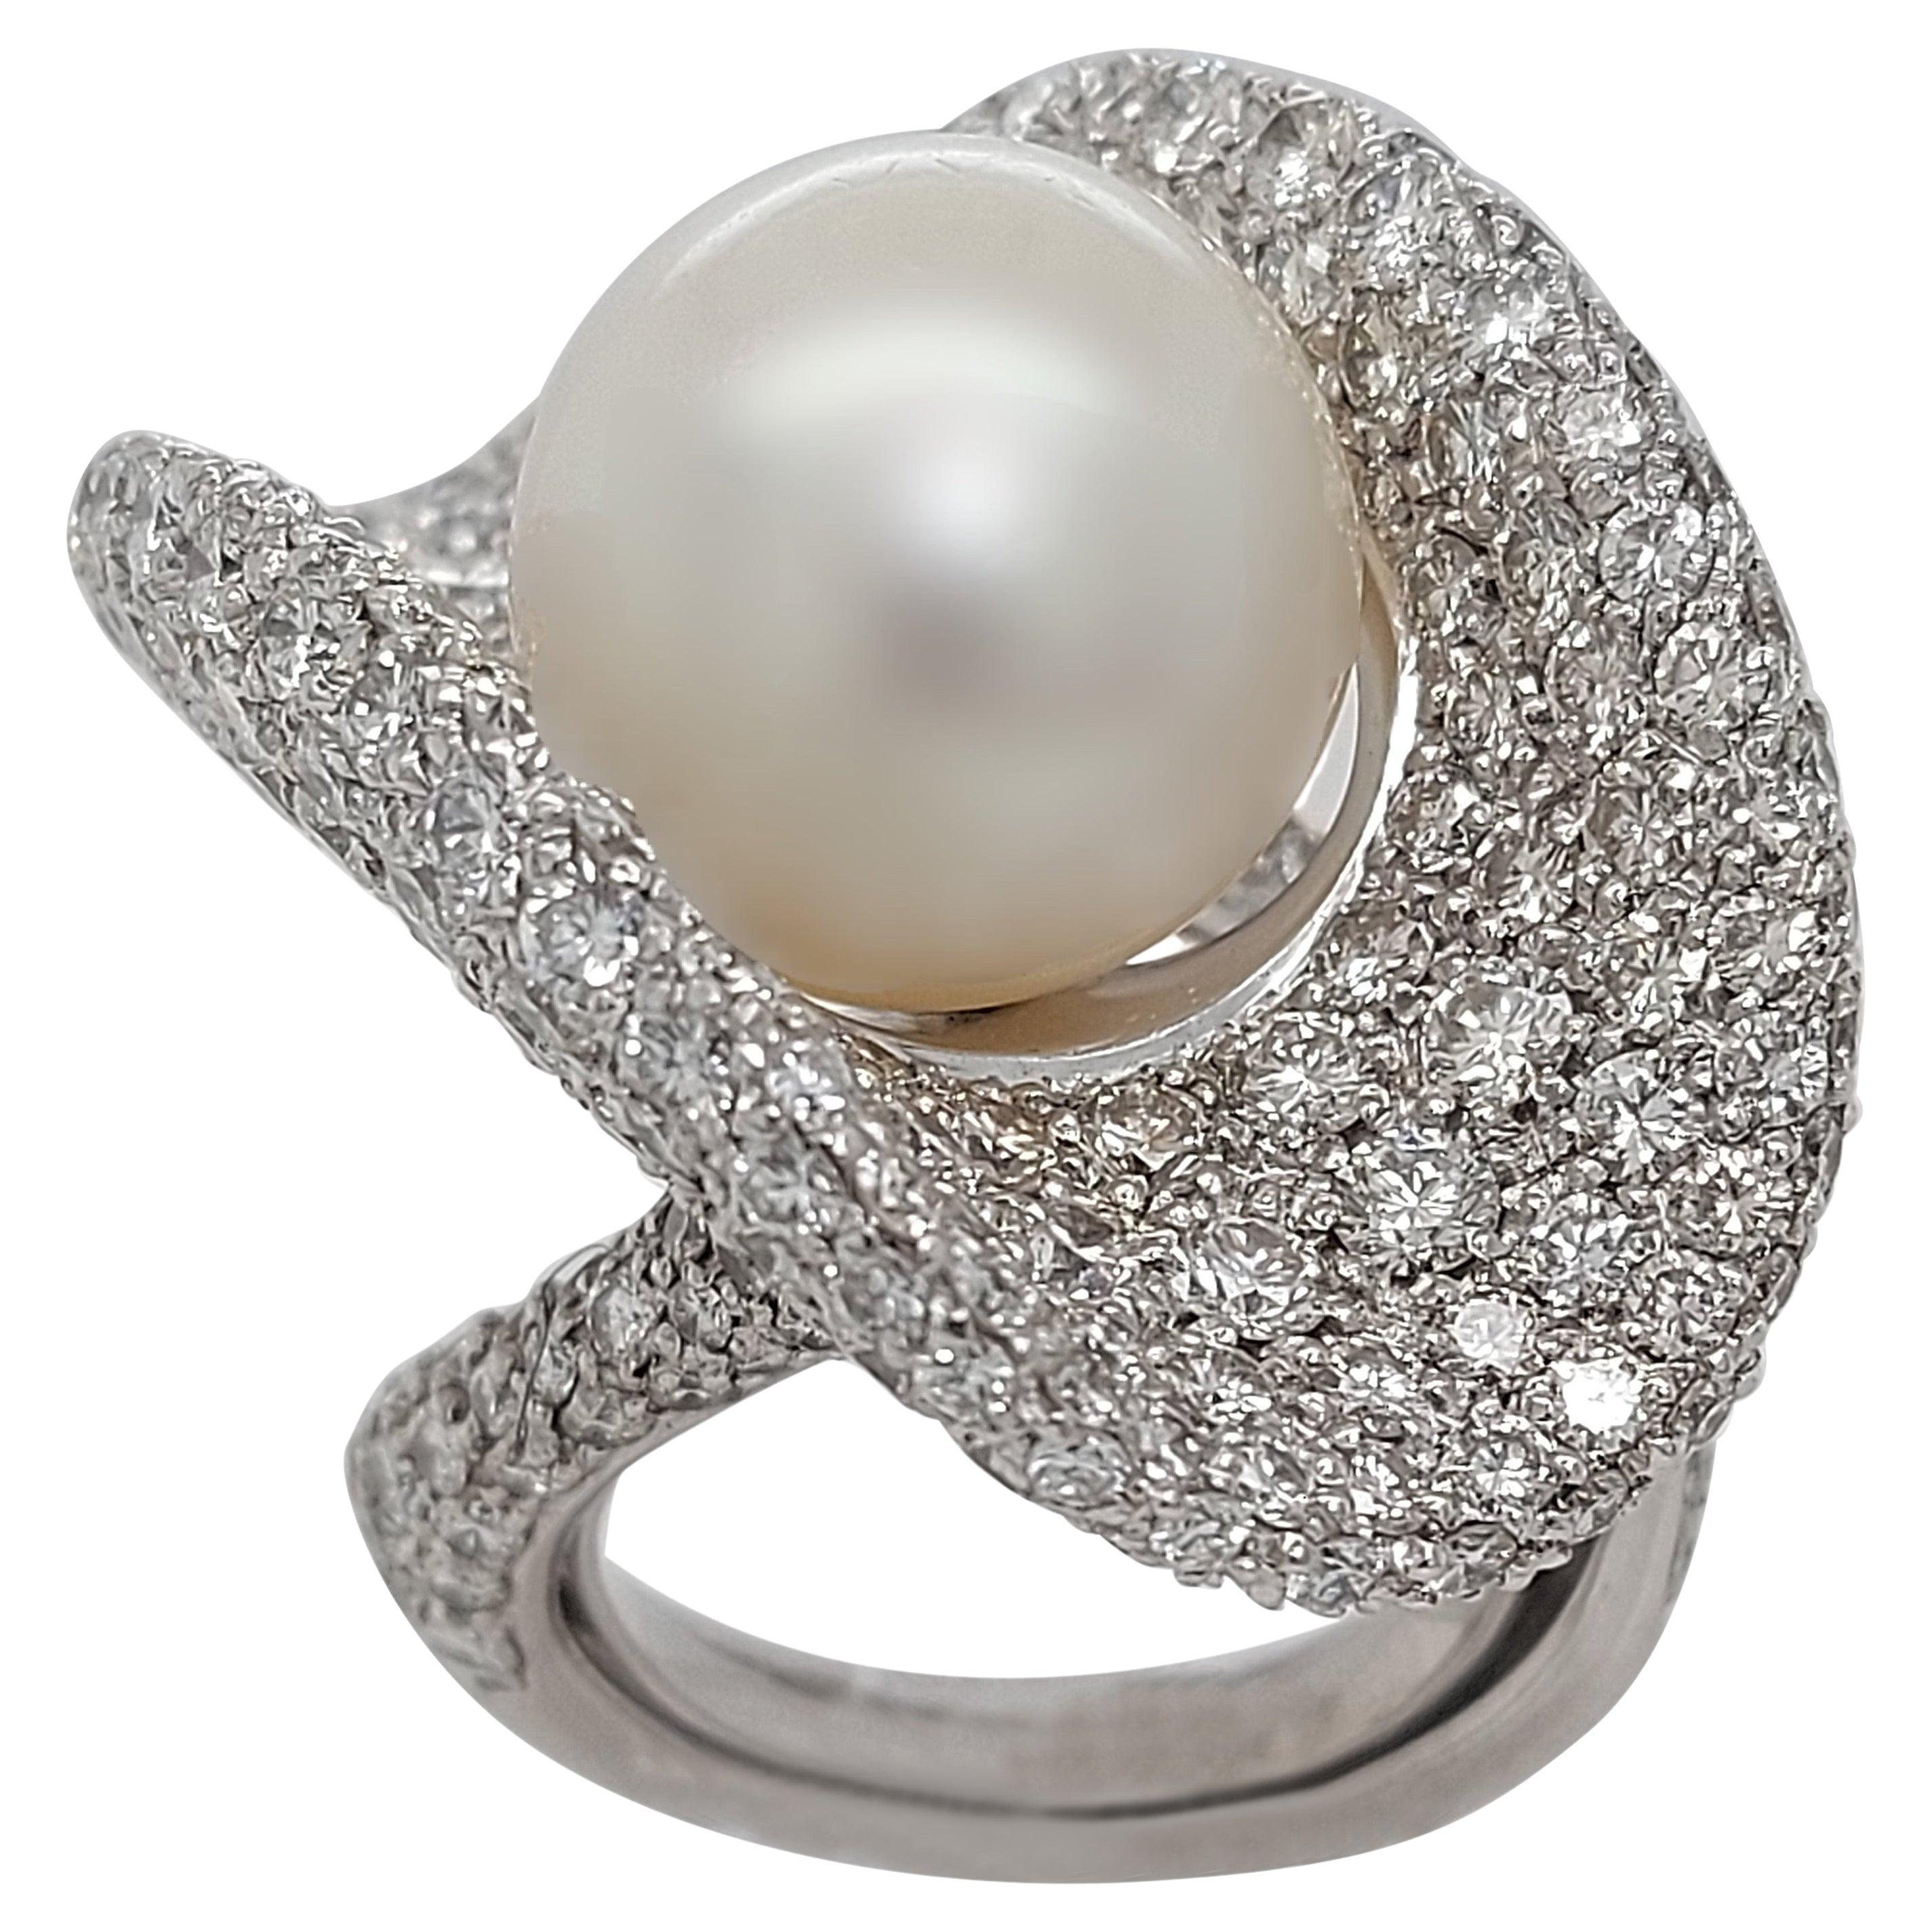 Magnificent 18 Karat White Gold Ring with 14.5 Carat Diamonds and a Big Pearl For Sale